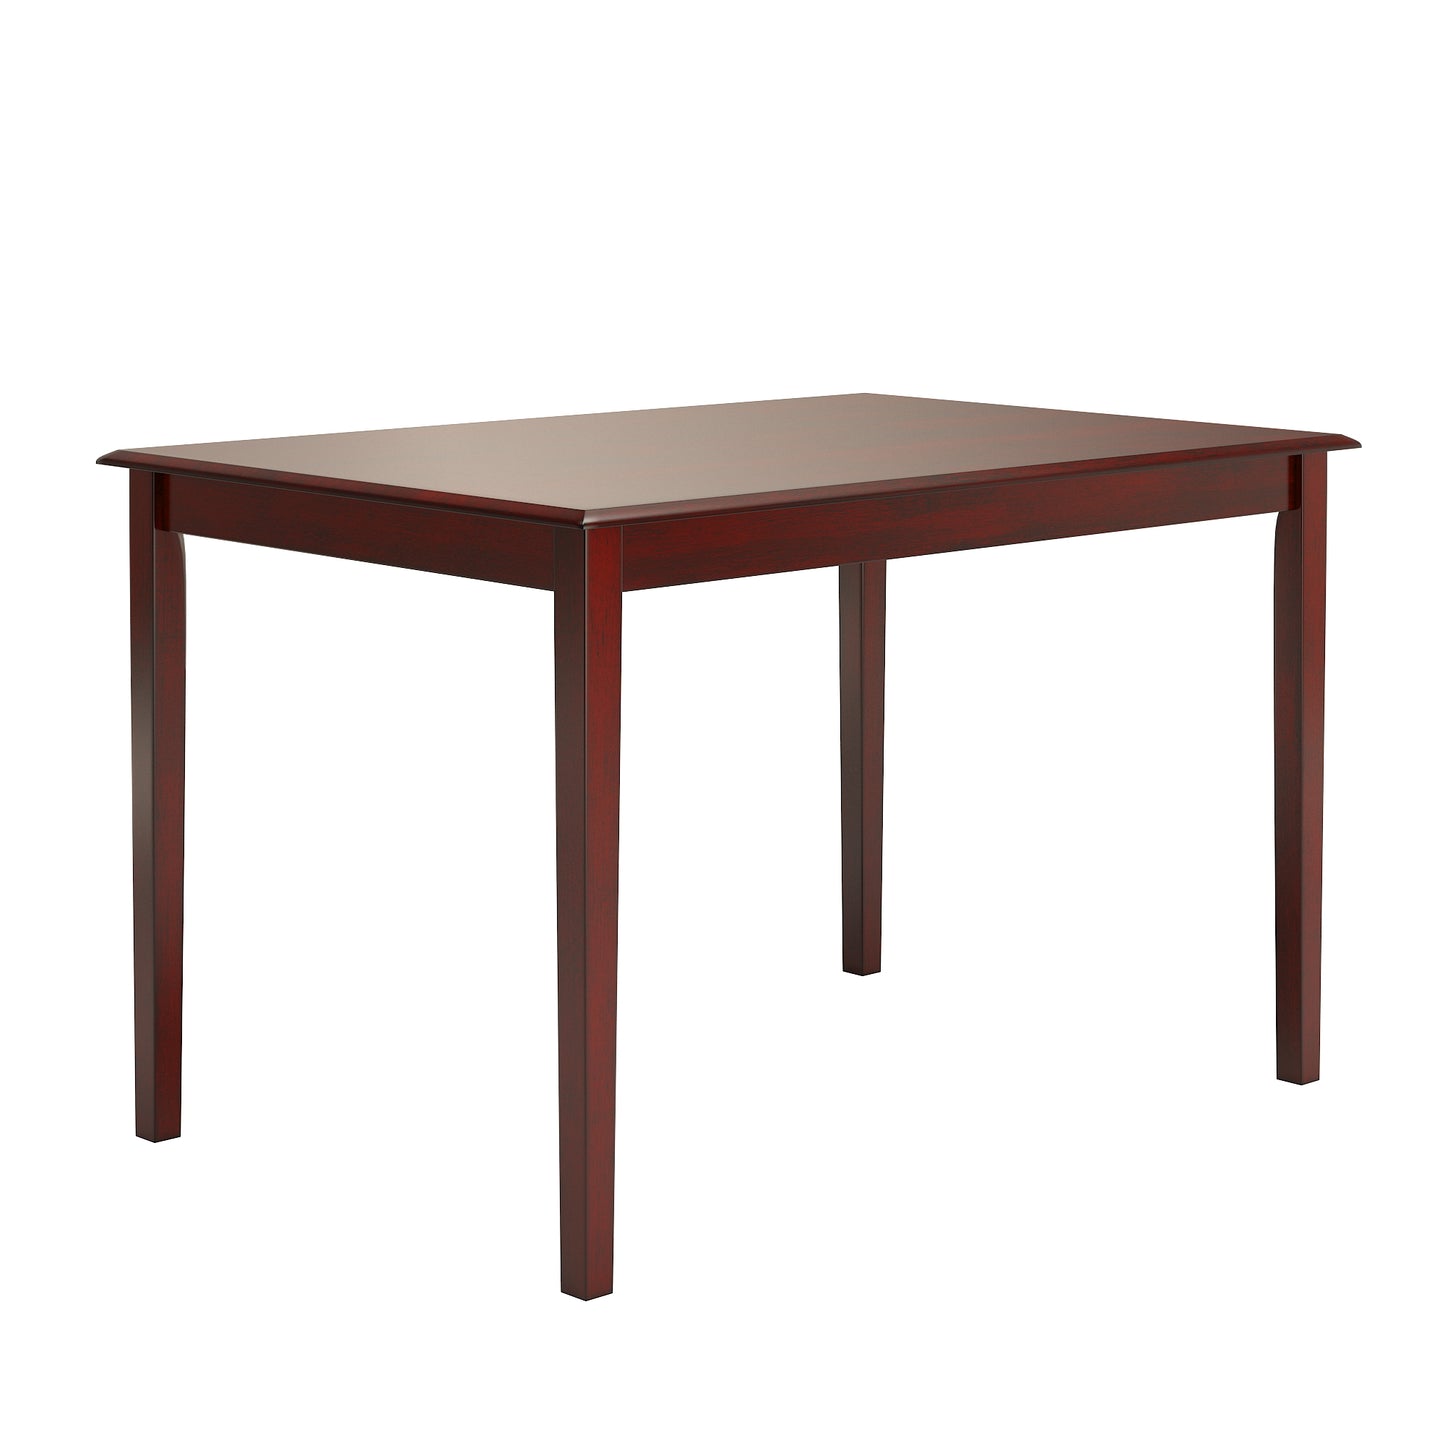 Oak Wood Finish 48-inch Rectangle Dining Set - Antique Berry Red Finish, Window Back Chairs